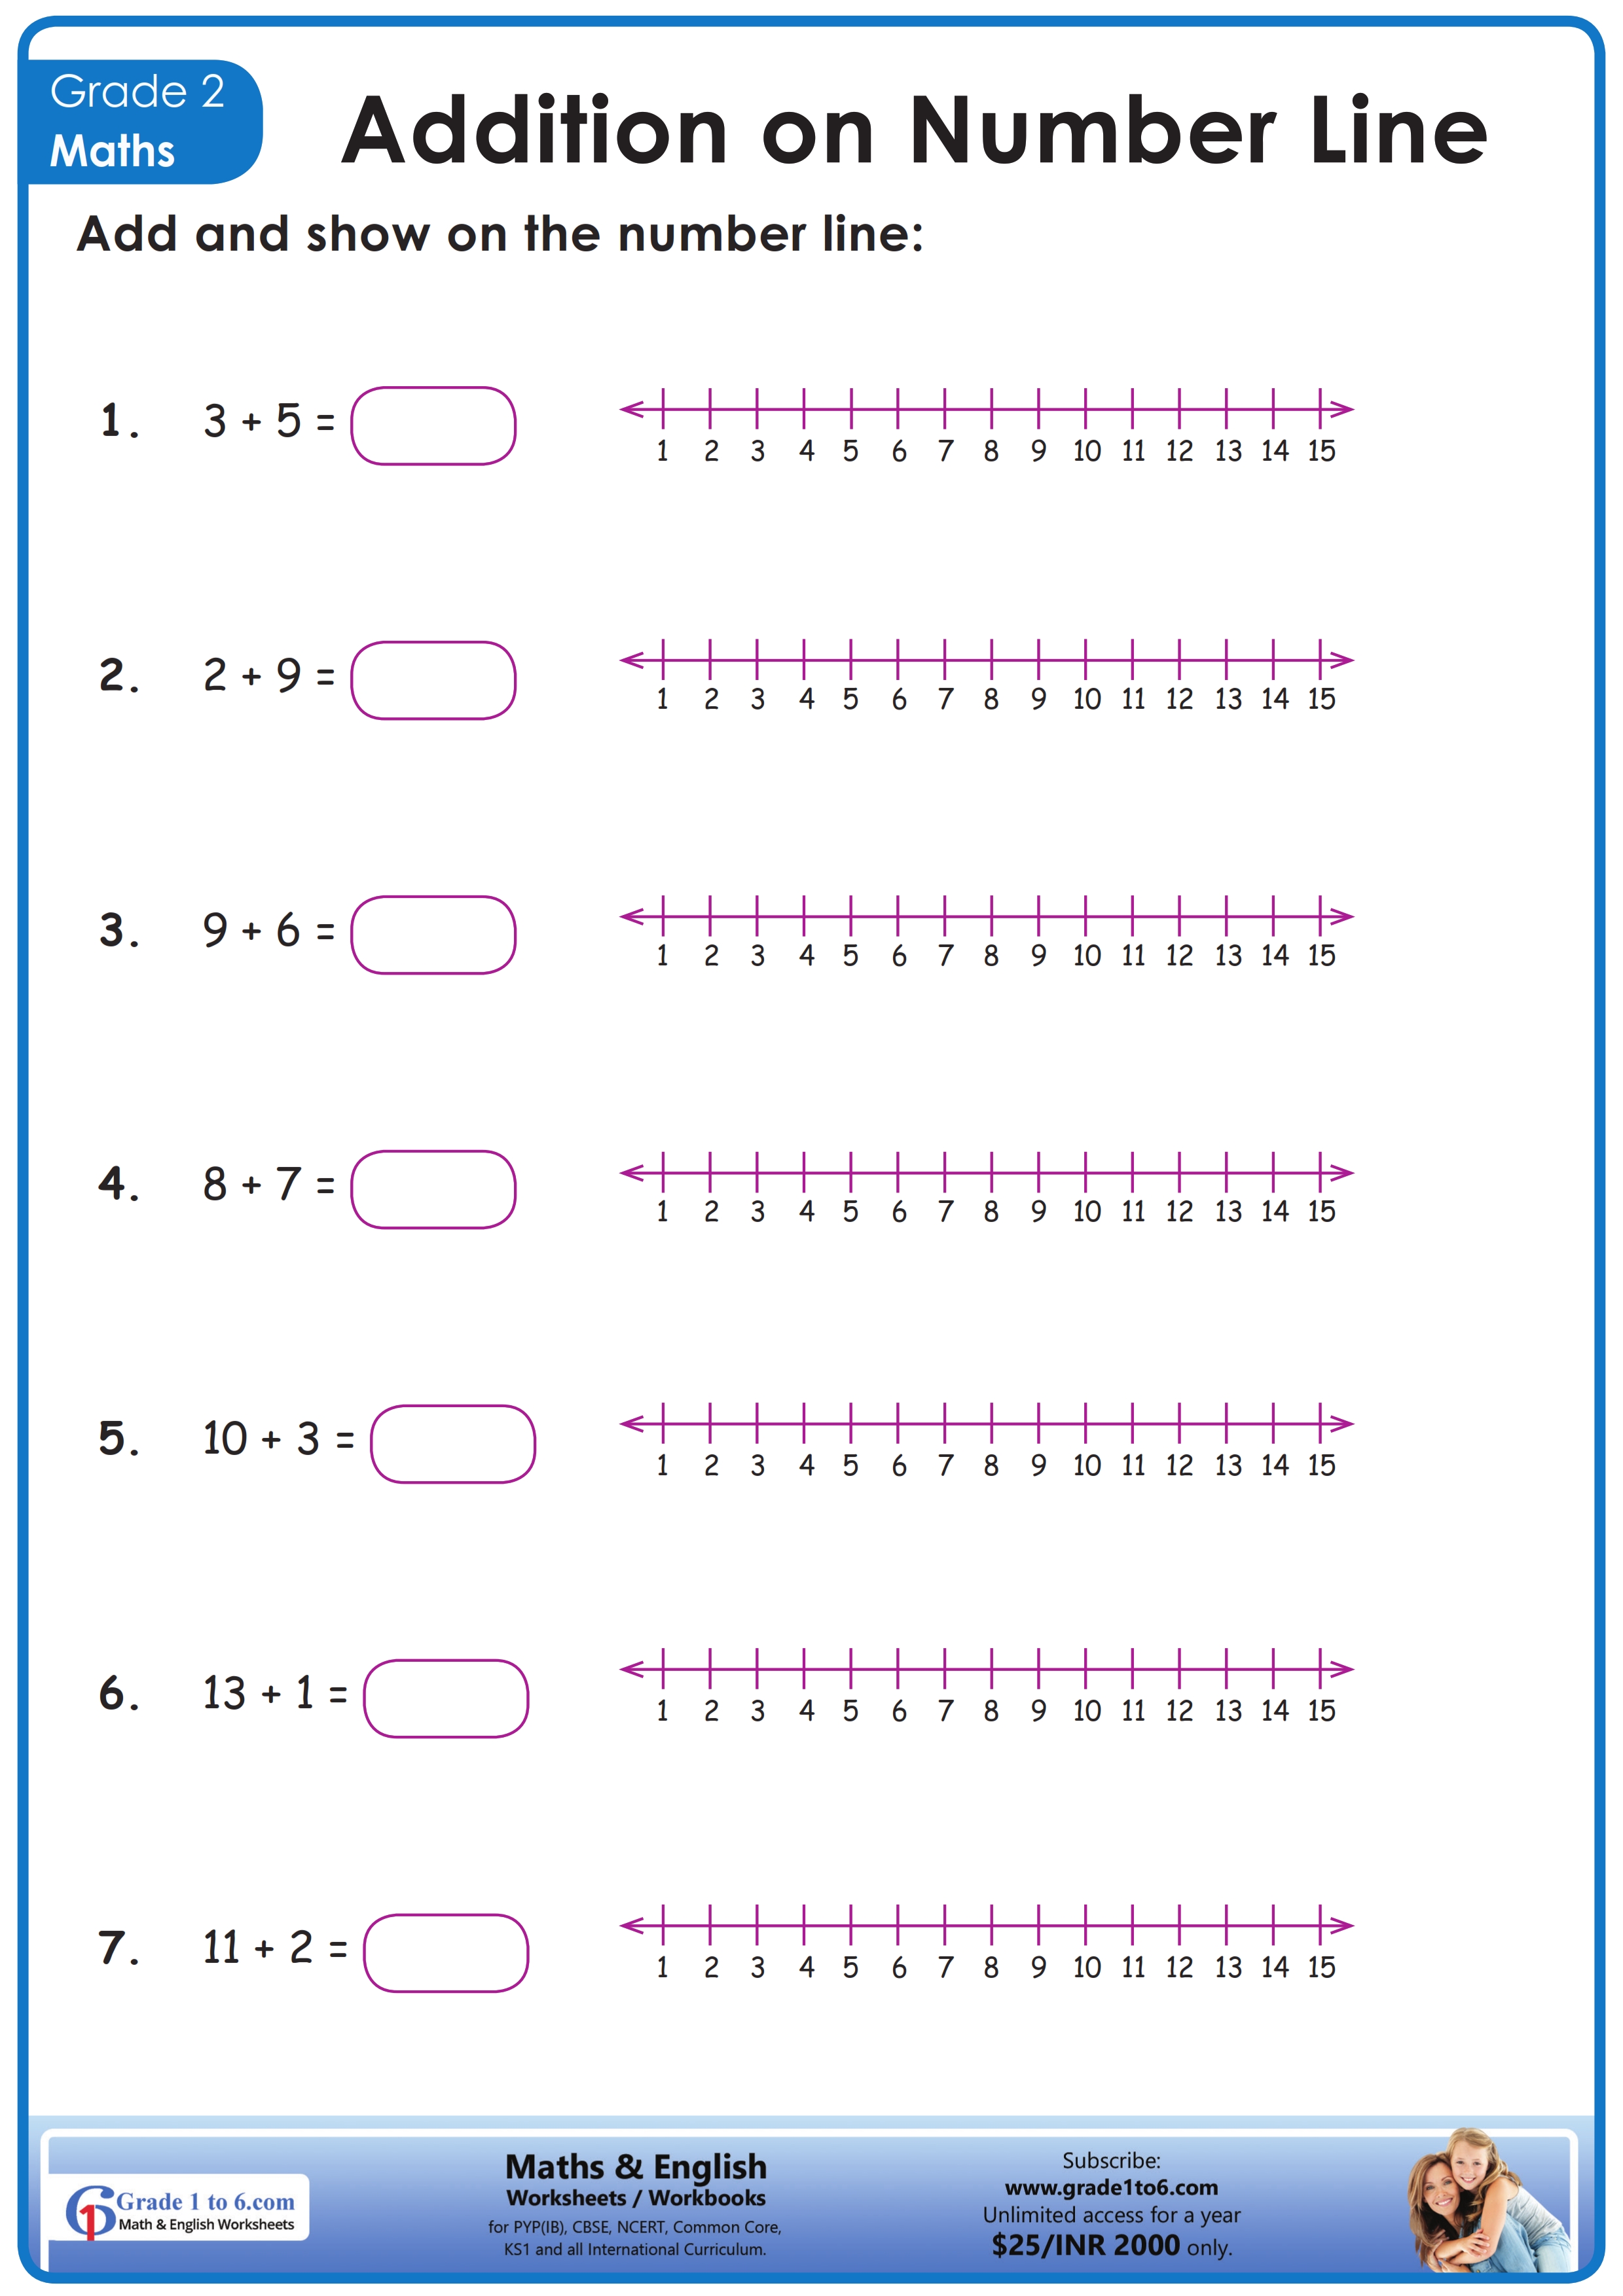 class-2-maths-addition-on-a-number-line-worksheet-grade1to6